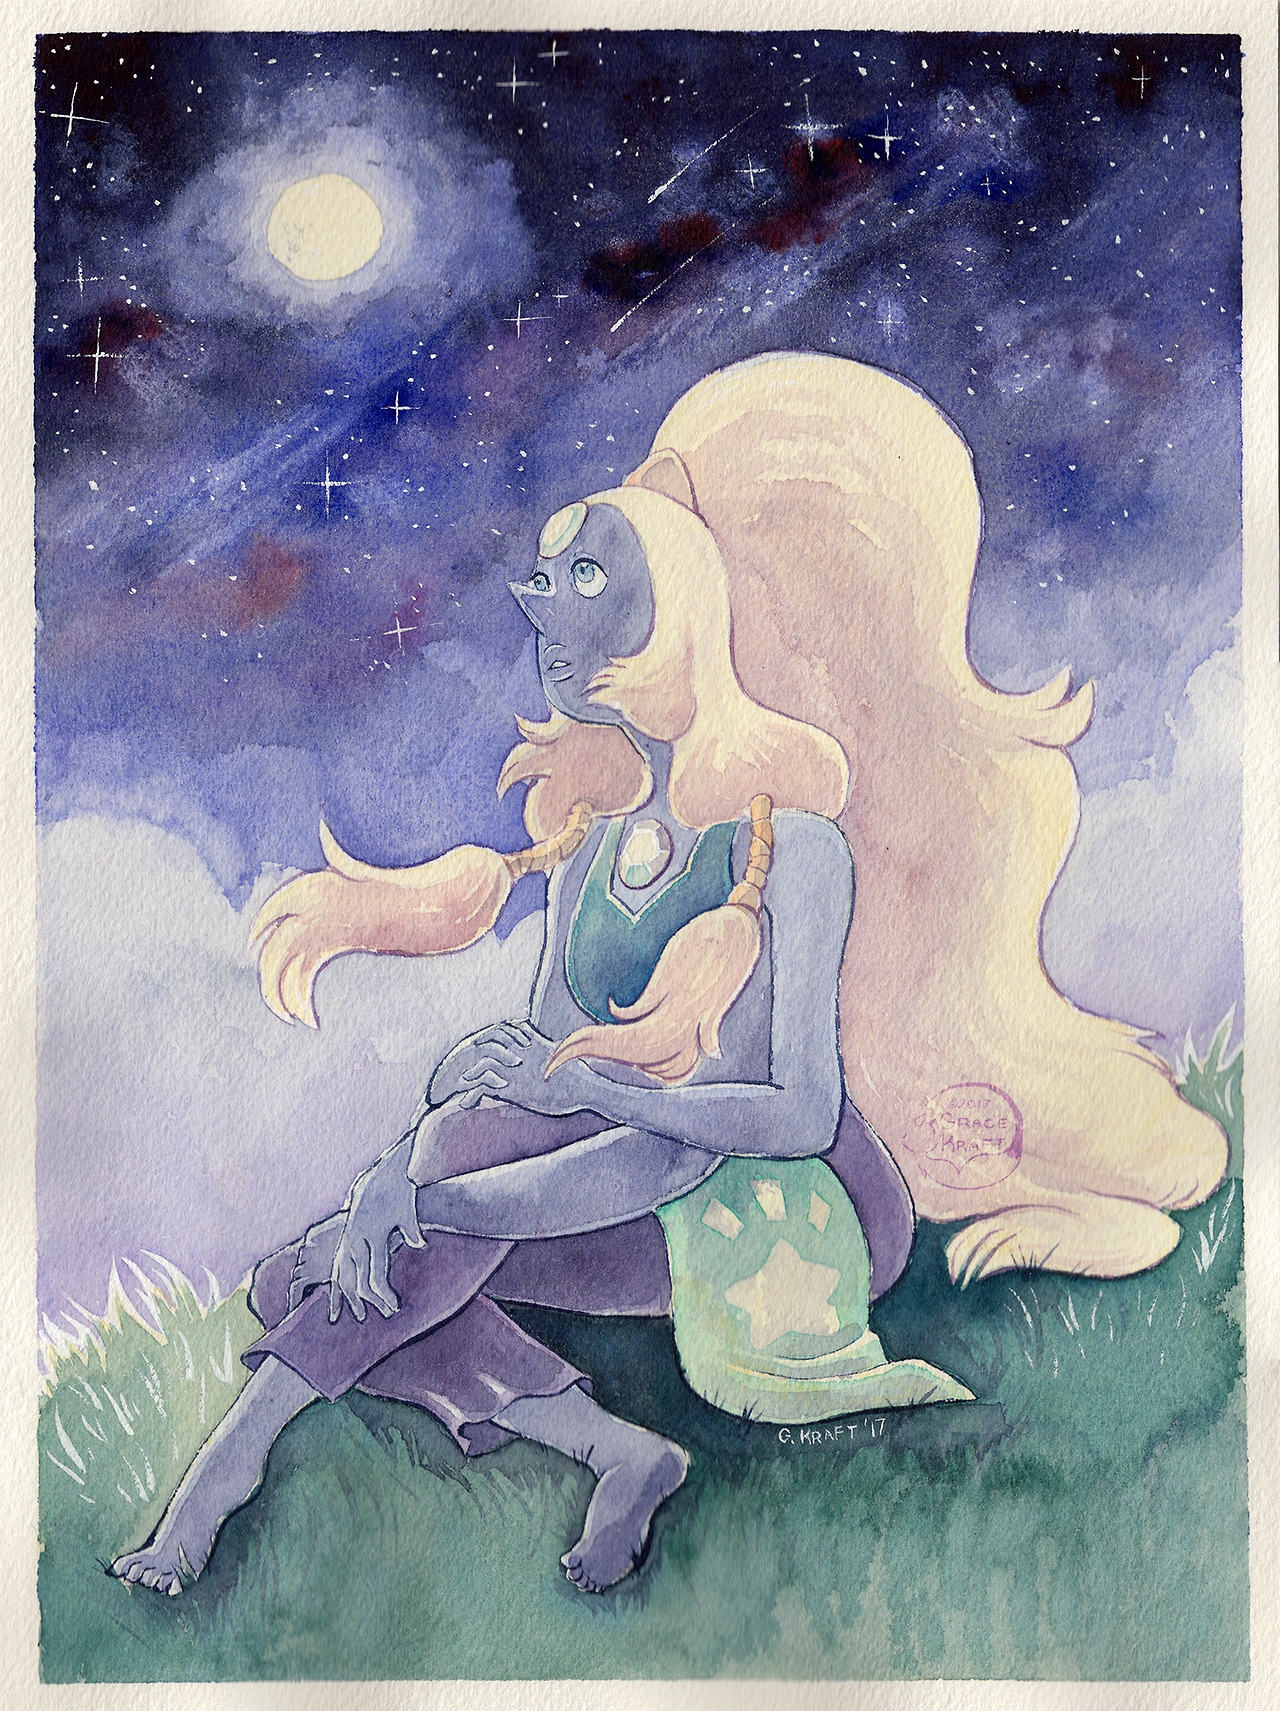 Getting paid to draw Opal is always a pleasure and this piece is no exception.

 I was listening to a lot of Aimee Mann’s Lost in Space album while sketching initial ideas for this piece.  I wanted to capture that type of peaceful, wistful melancholy that I feel is present in Opal’s character that Aimee’s songs communicate really well.  

 Opal is the combination of a gem that was originally from space and a gem that has hardly left Earth, those are some potentially messy feelings to come together.  A longing to leave and a desire to stay.  I also enjoy Pearl and Amethyst representing heaven and earth in way, given their temperaments and origins.  It’s something I feel the location of Giant Woman reflected.

 I could yammer on about Opal for a while but alas.

 I’ll most likely take on another commission batch around April.  If you’re interested, check out my commission post!